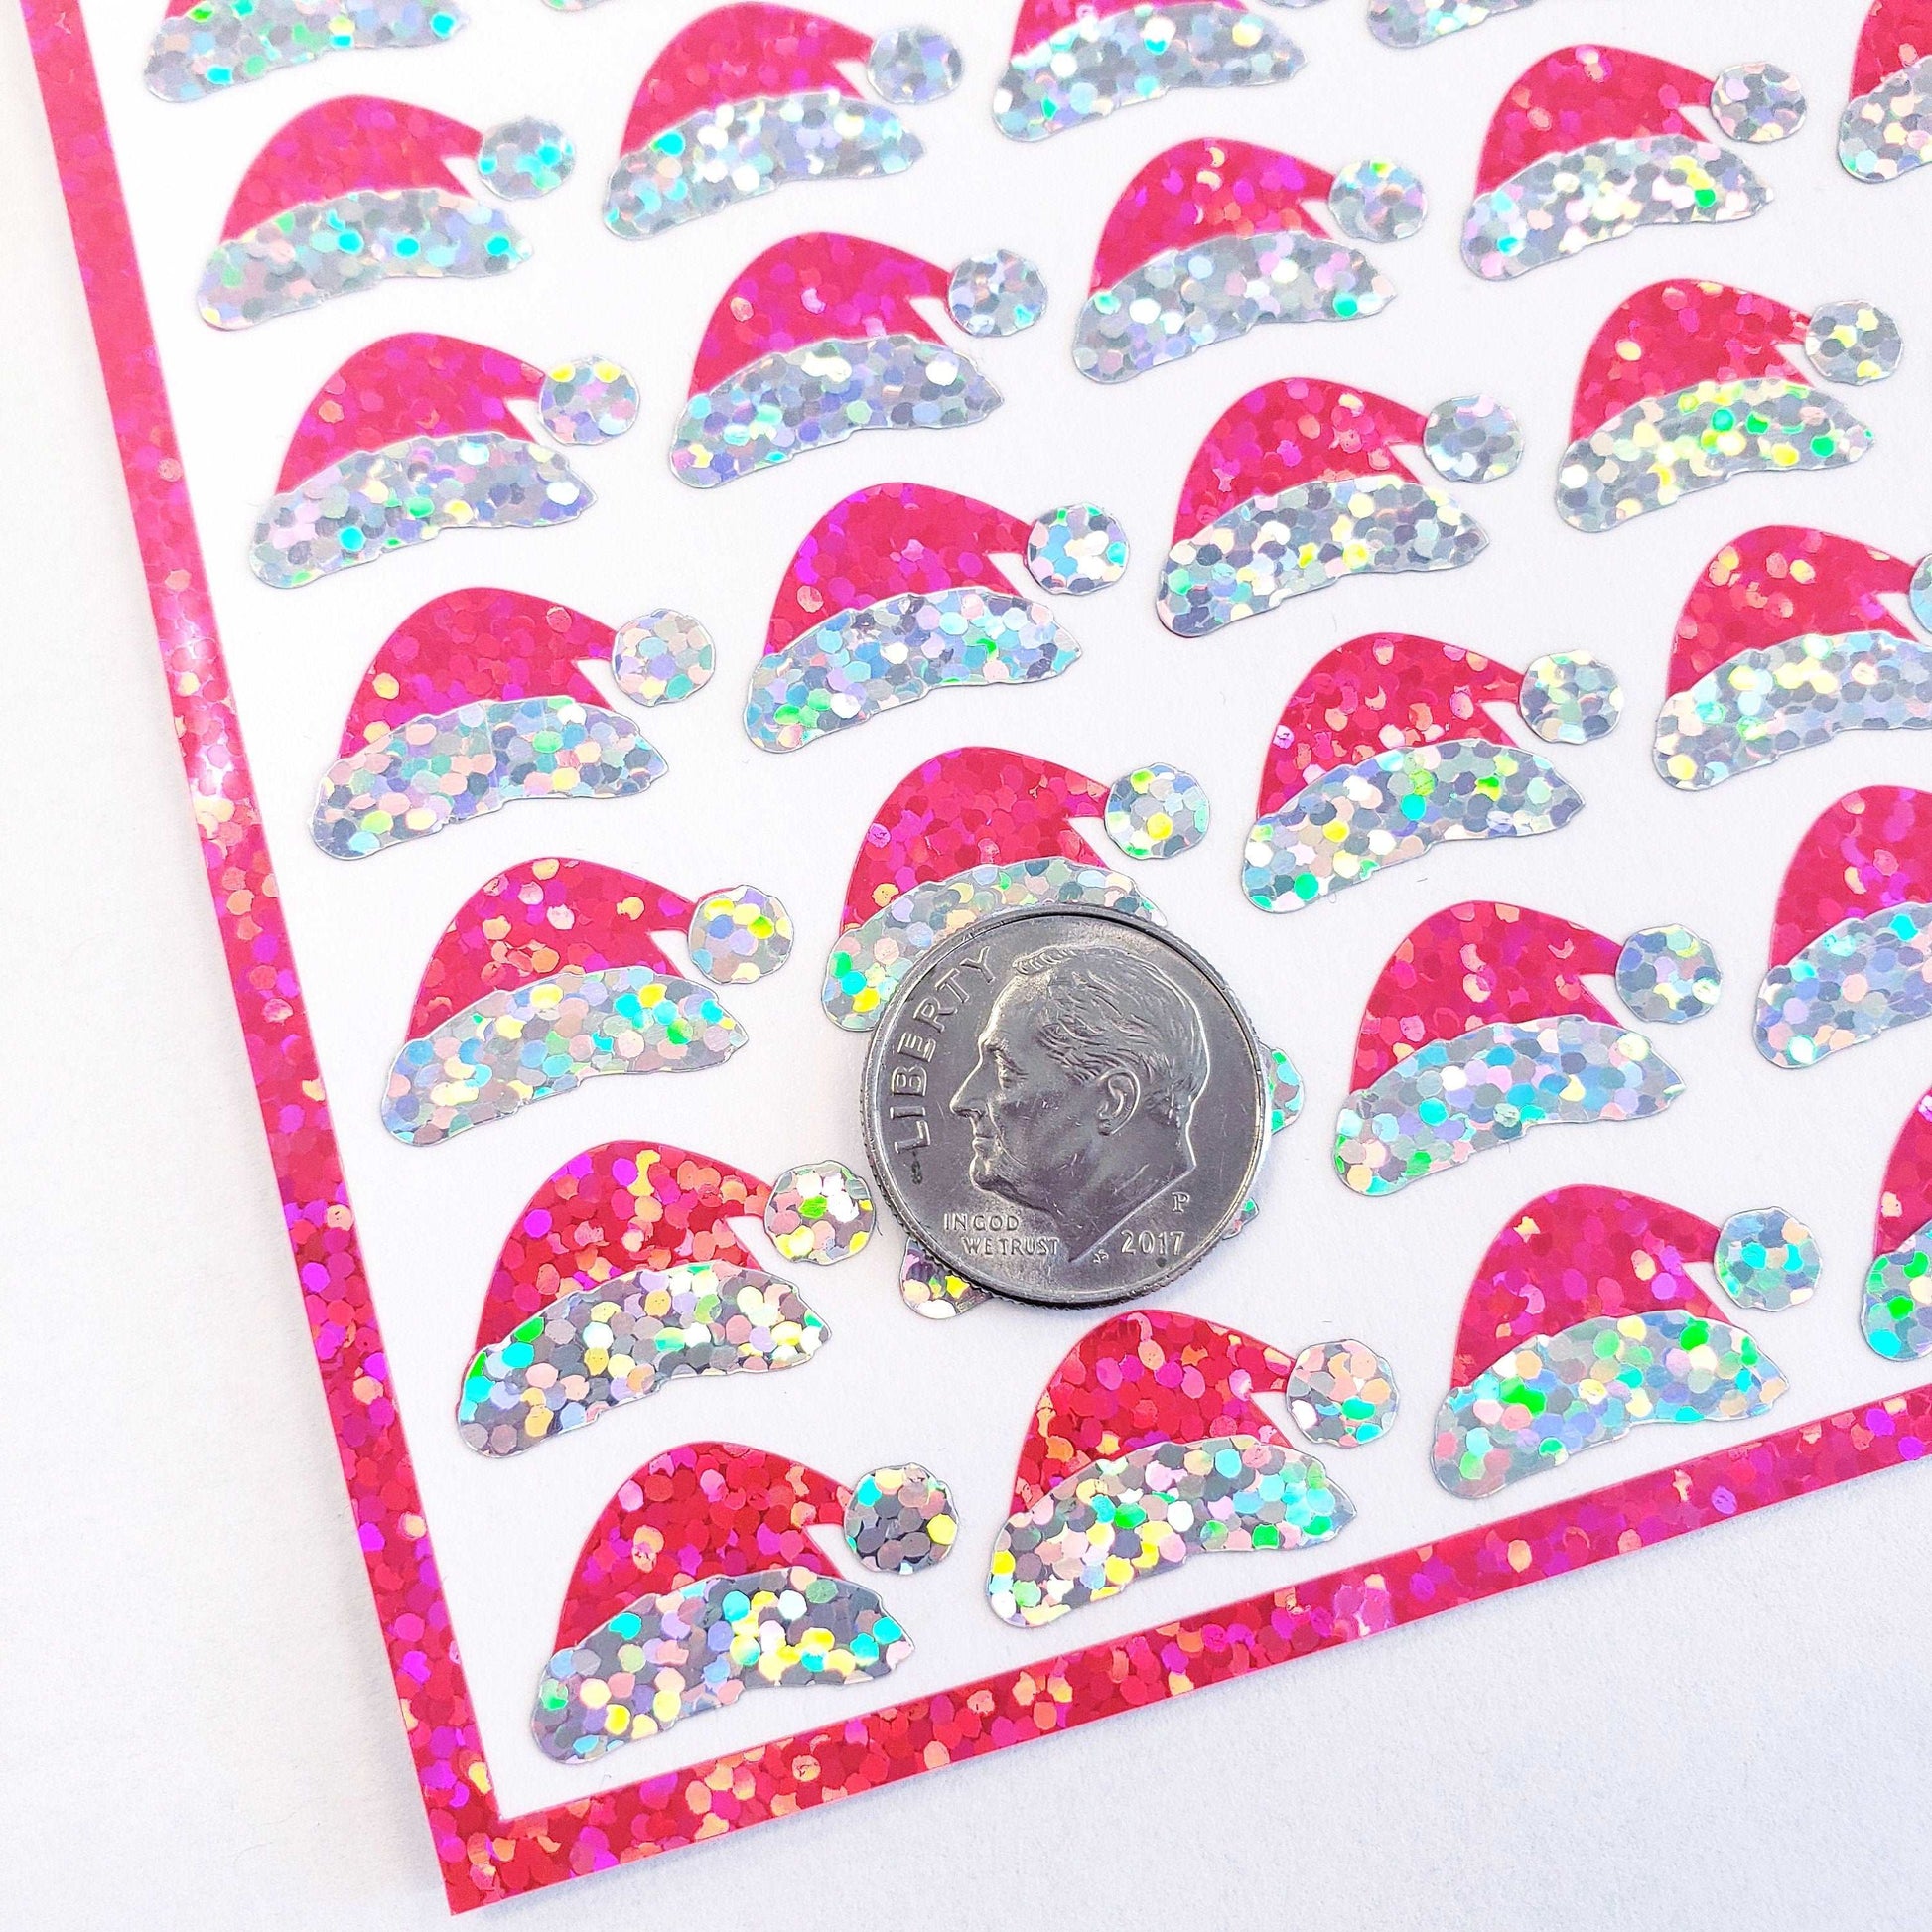 Mini Pink Santa Claus Hats Sticker Sheet. Set of 78 Santa Hat decorative glitter stickers for ornaments, crafts, envelopes and gift bags